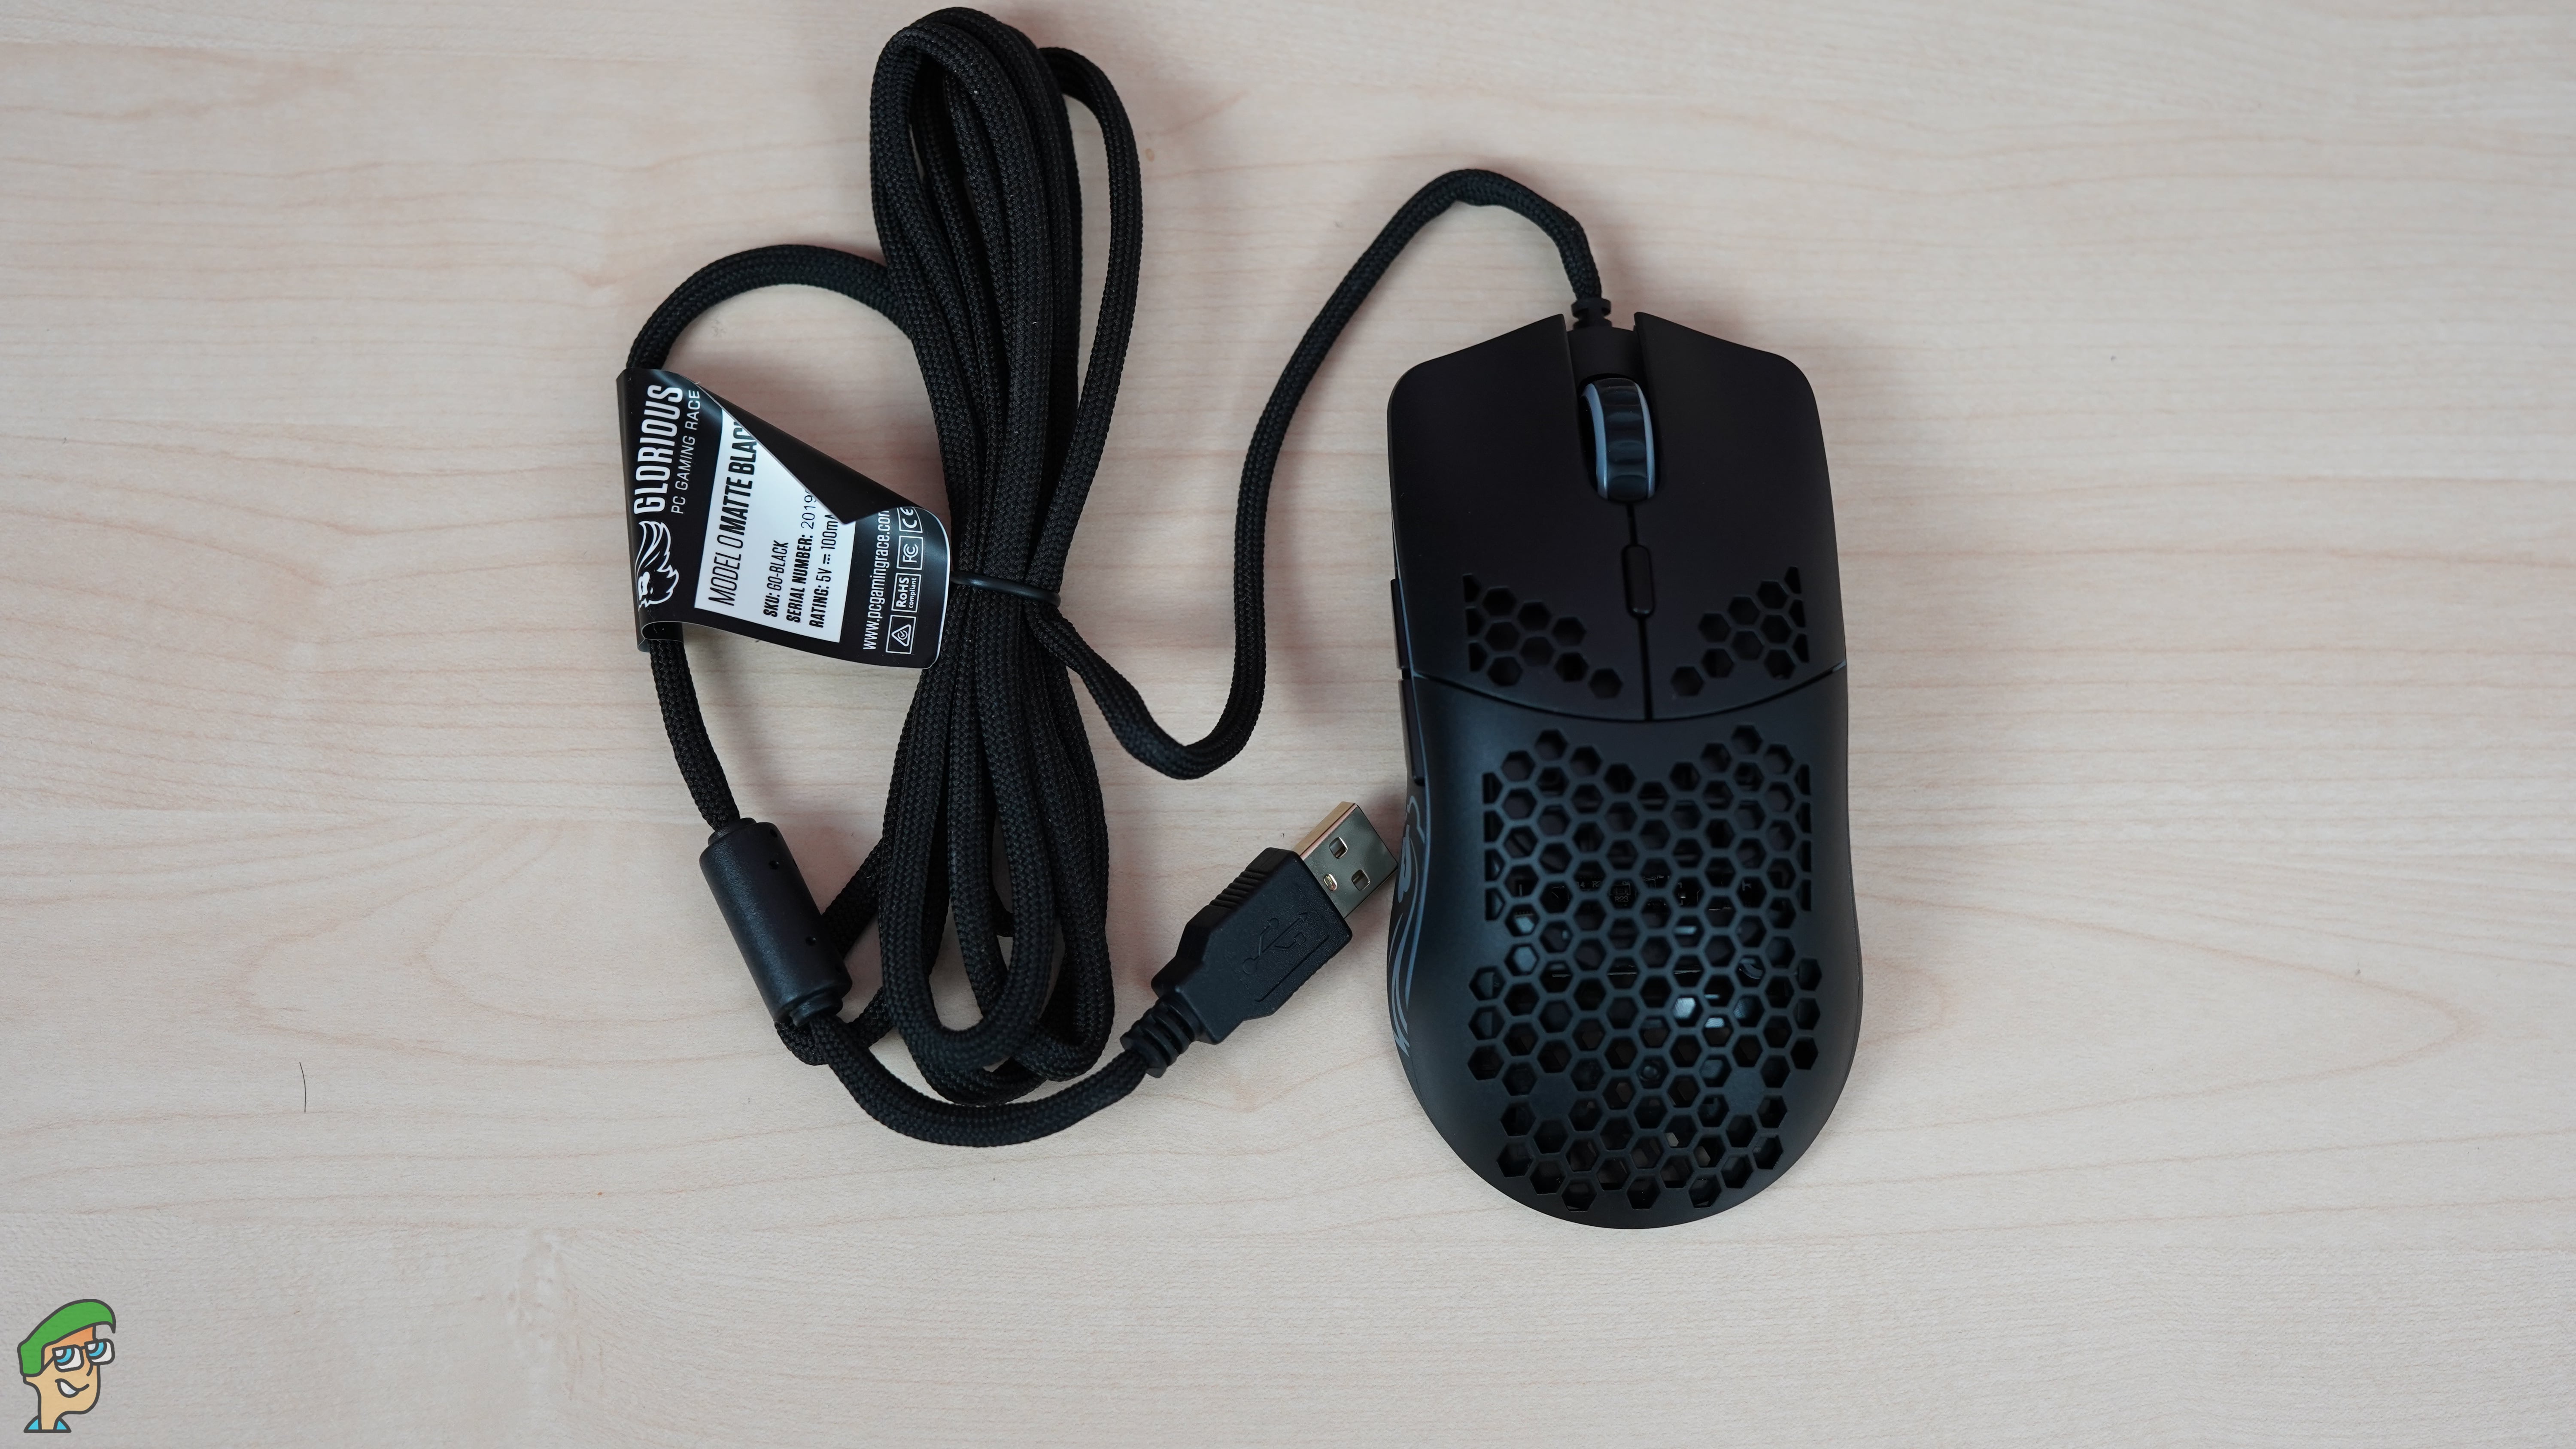 Pc Gaming Race Glorious Model O Mouse Review Appuals Com